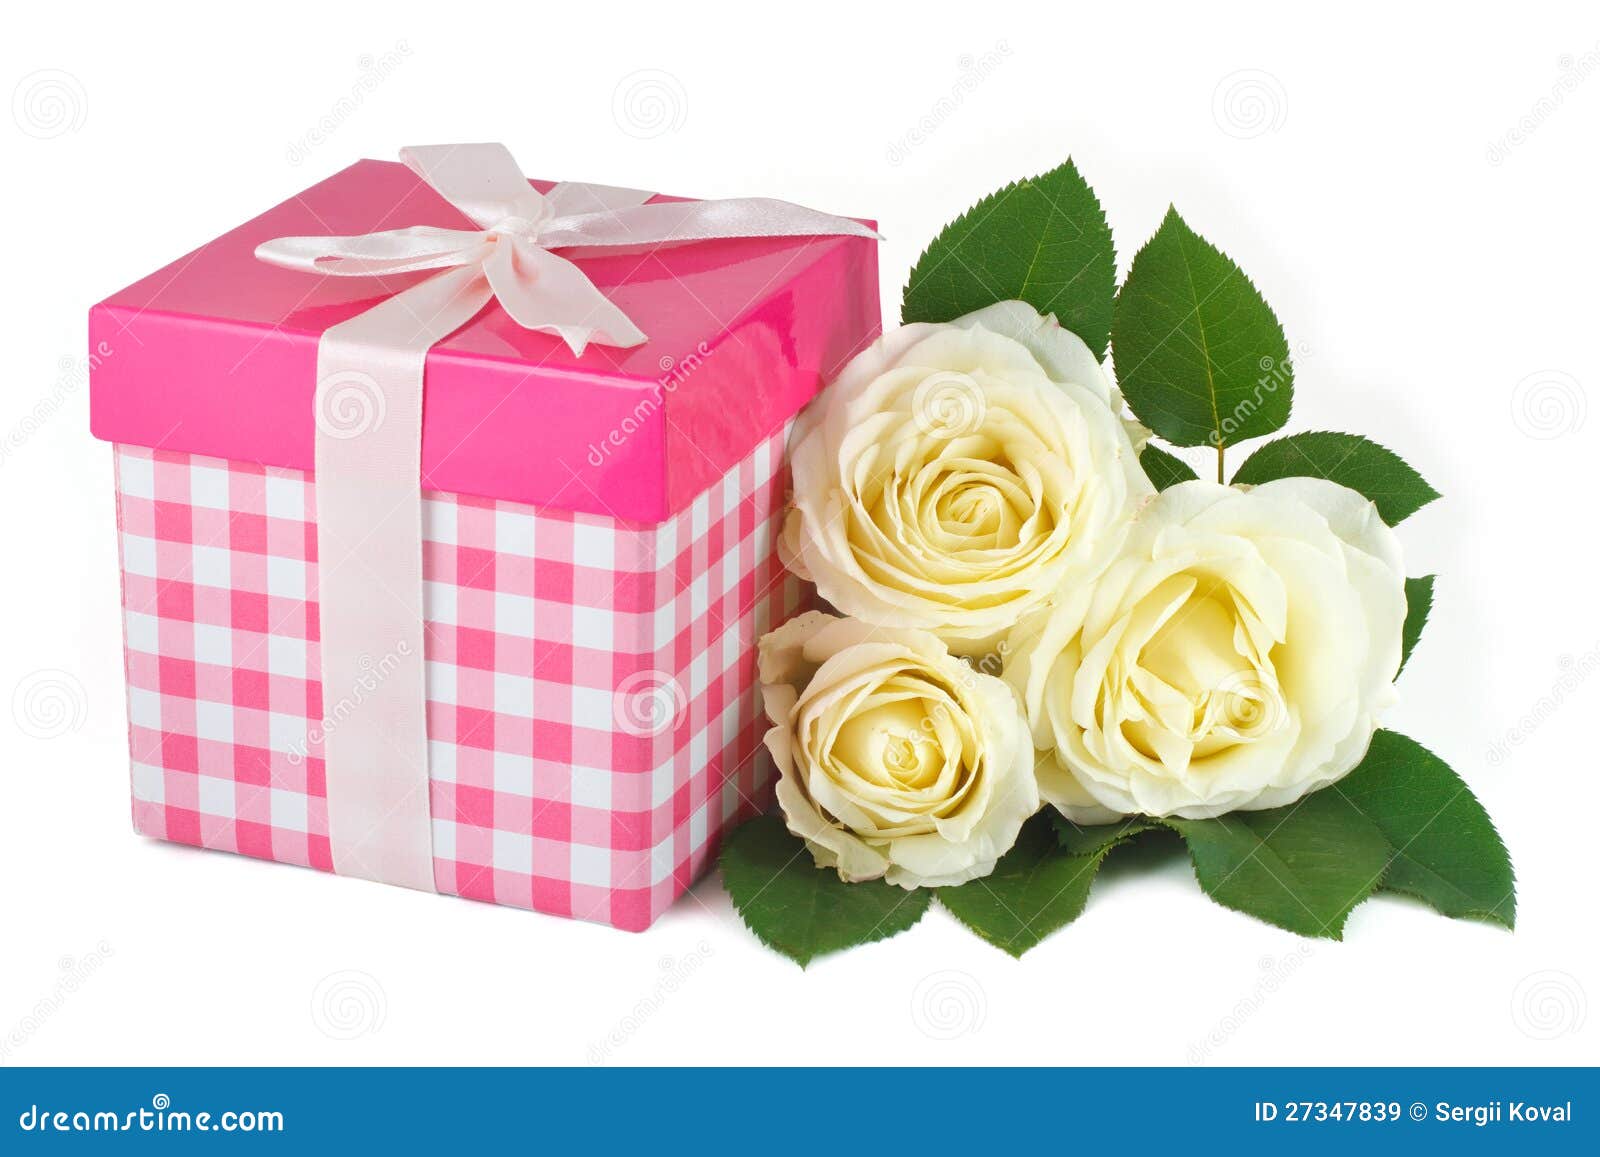 Gift Box With A Bow And A Bouquet Of Delicate Rose Stock